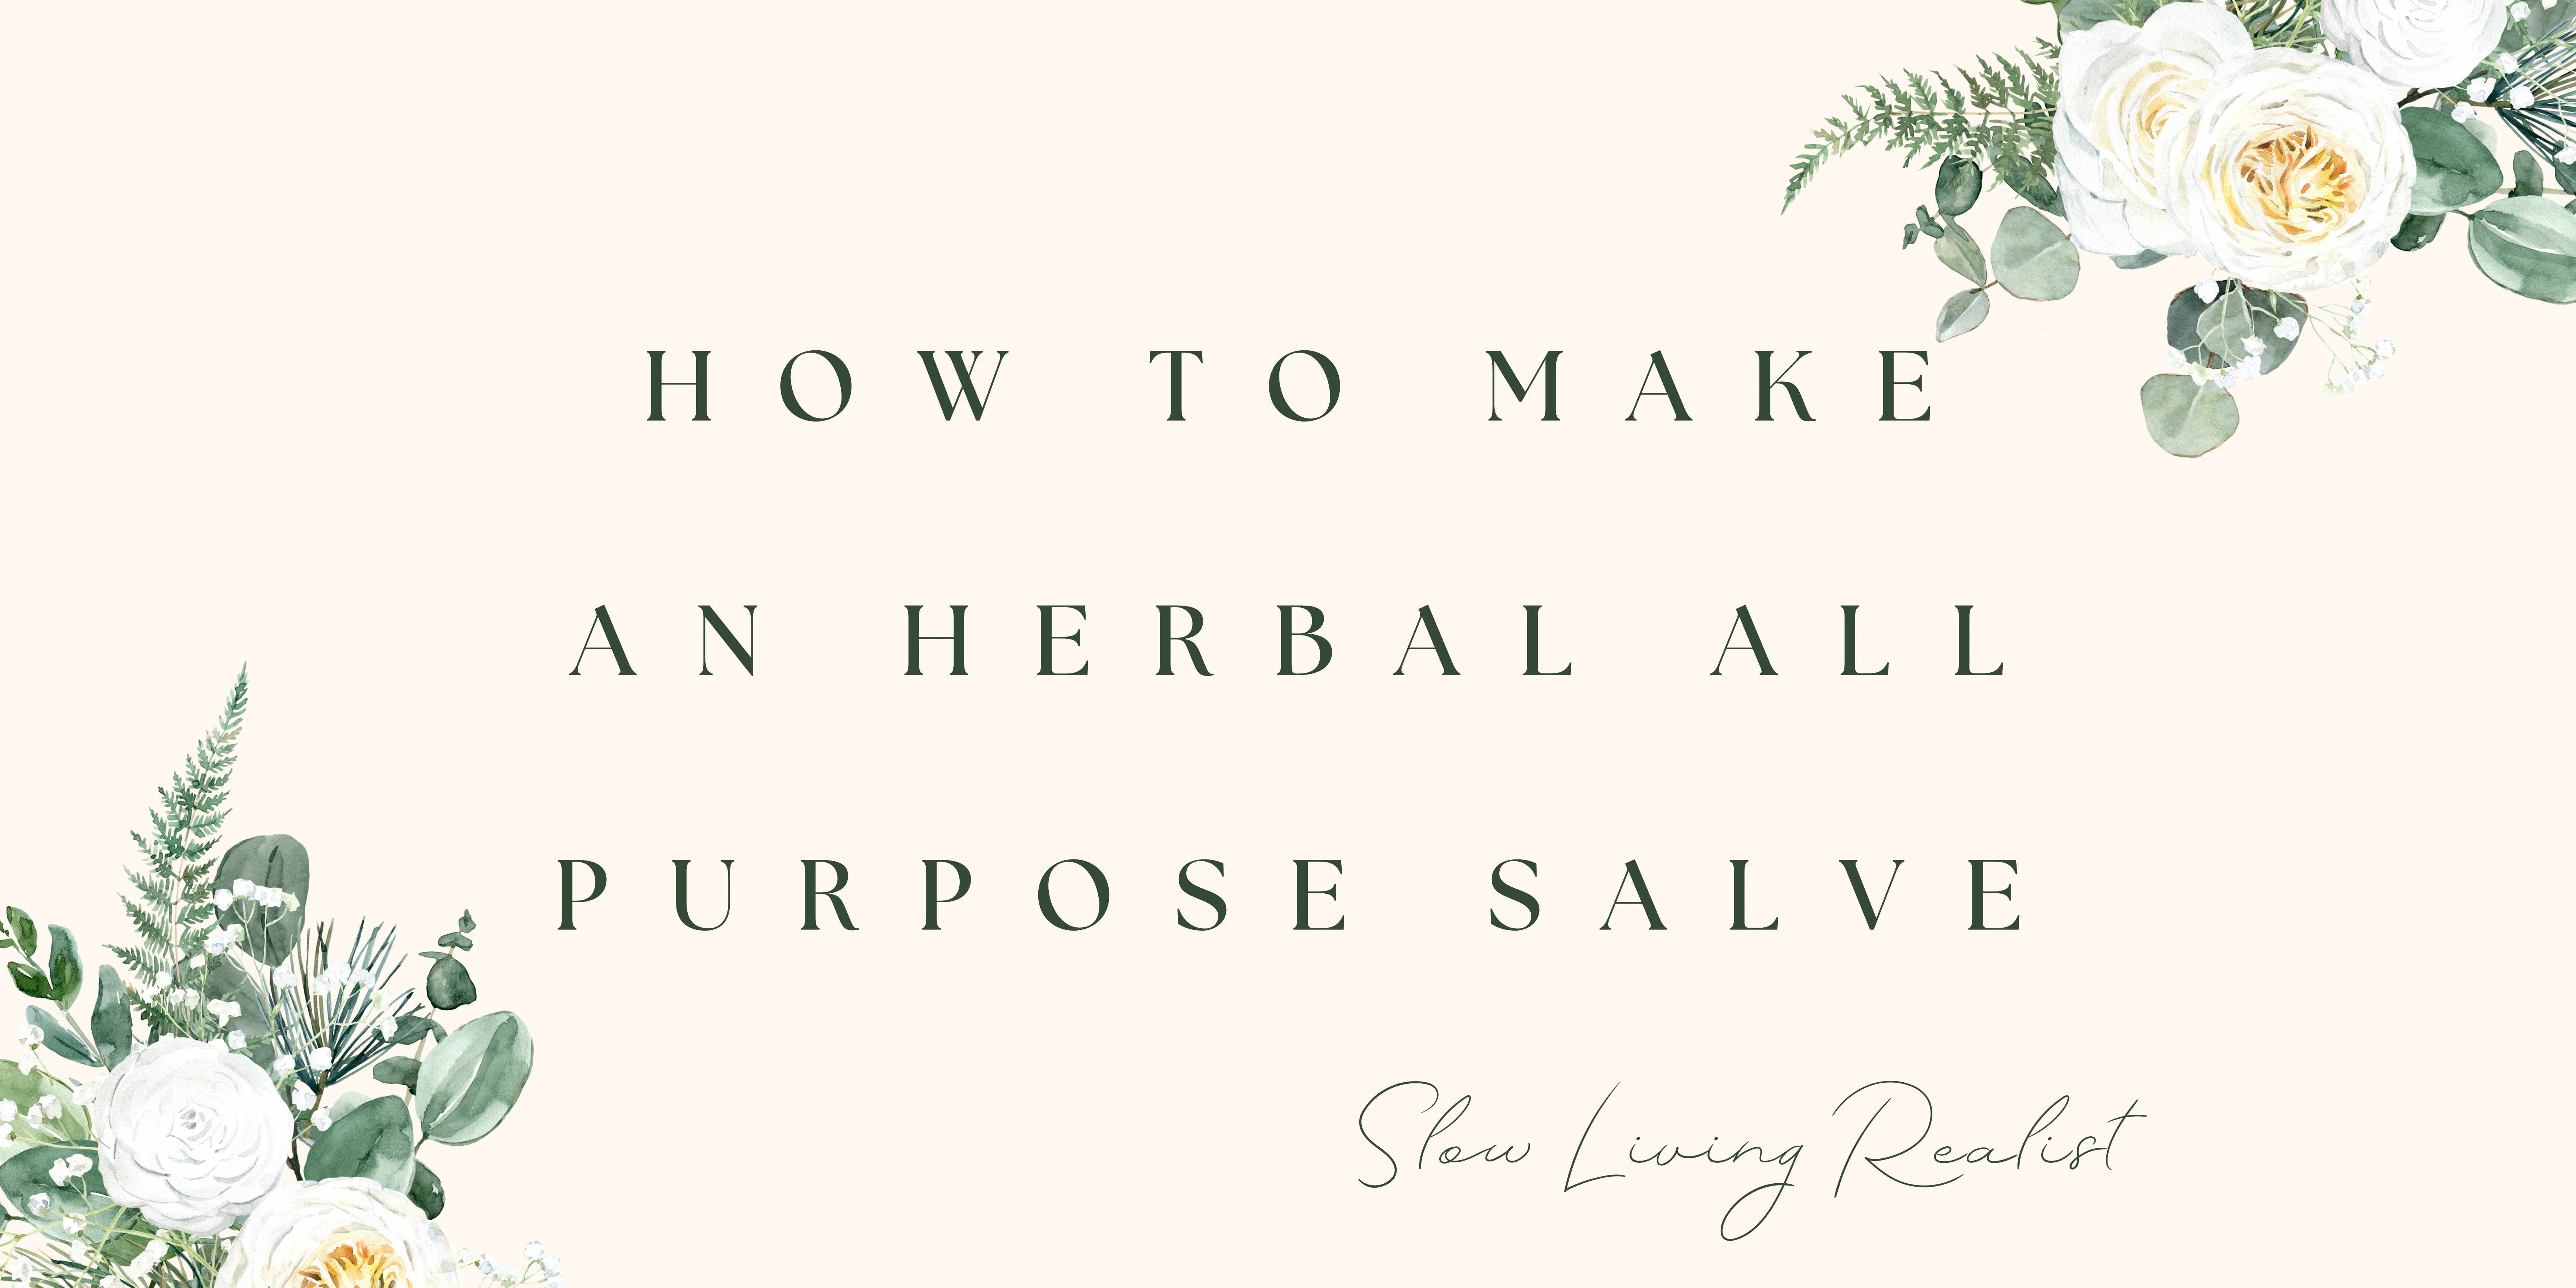 How to Make an Herbal All Purpose Salve